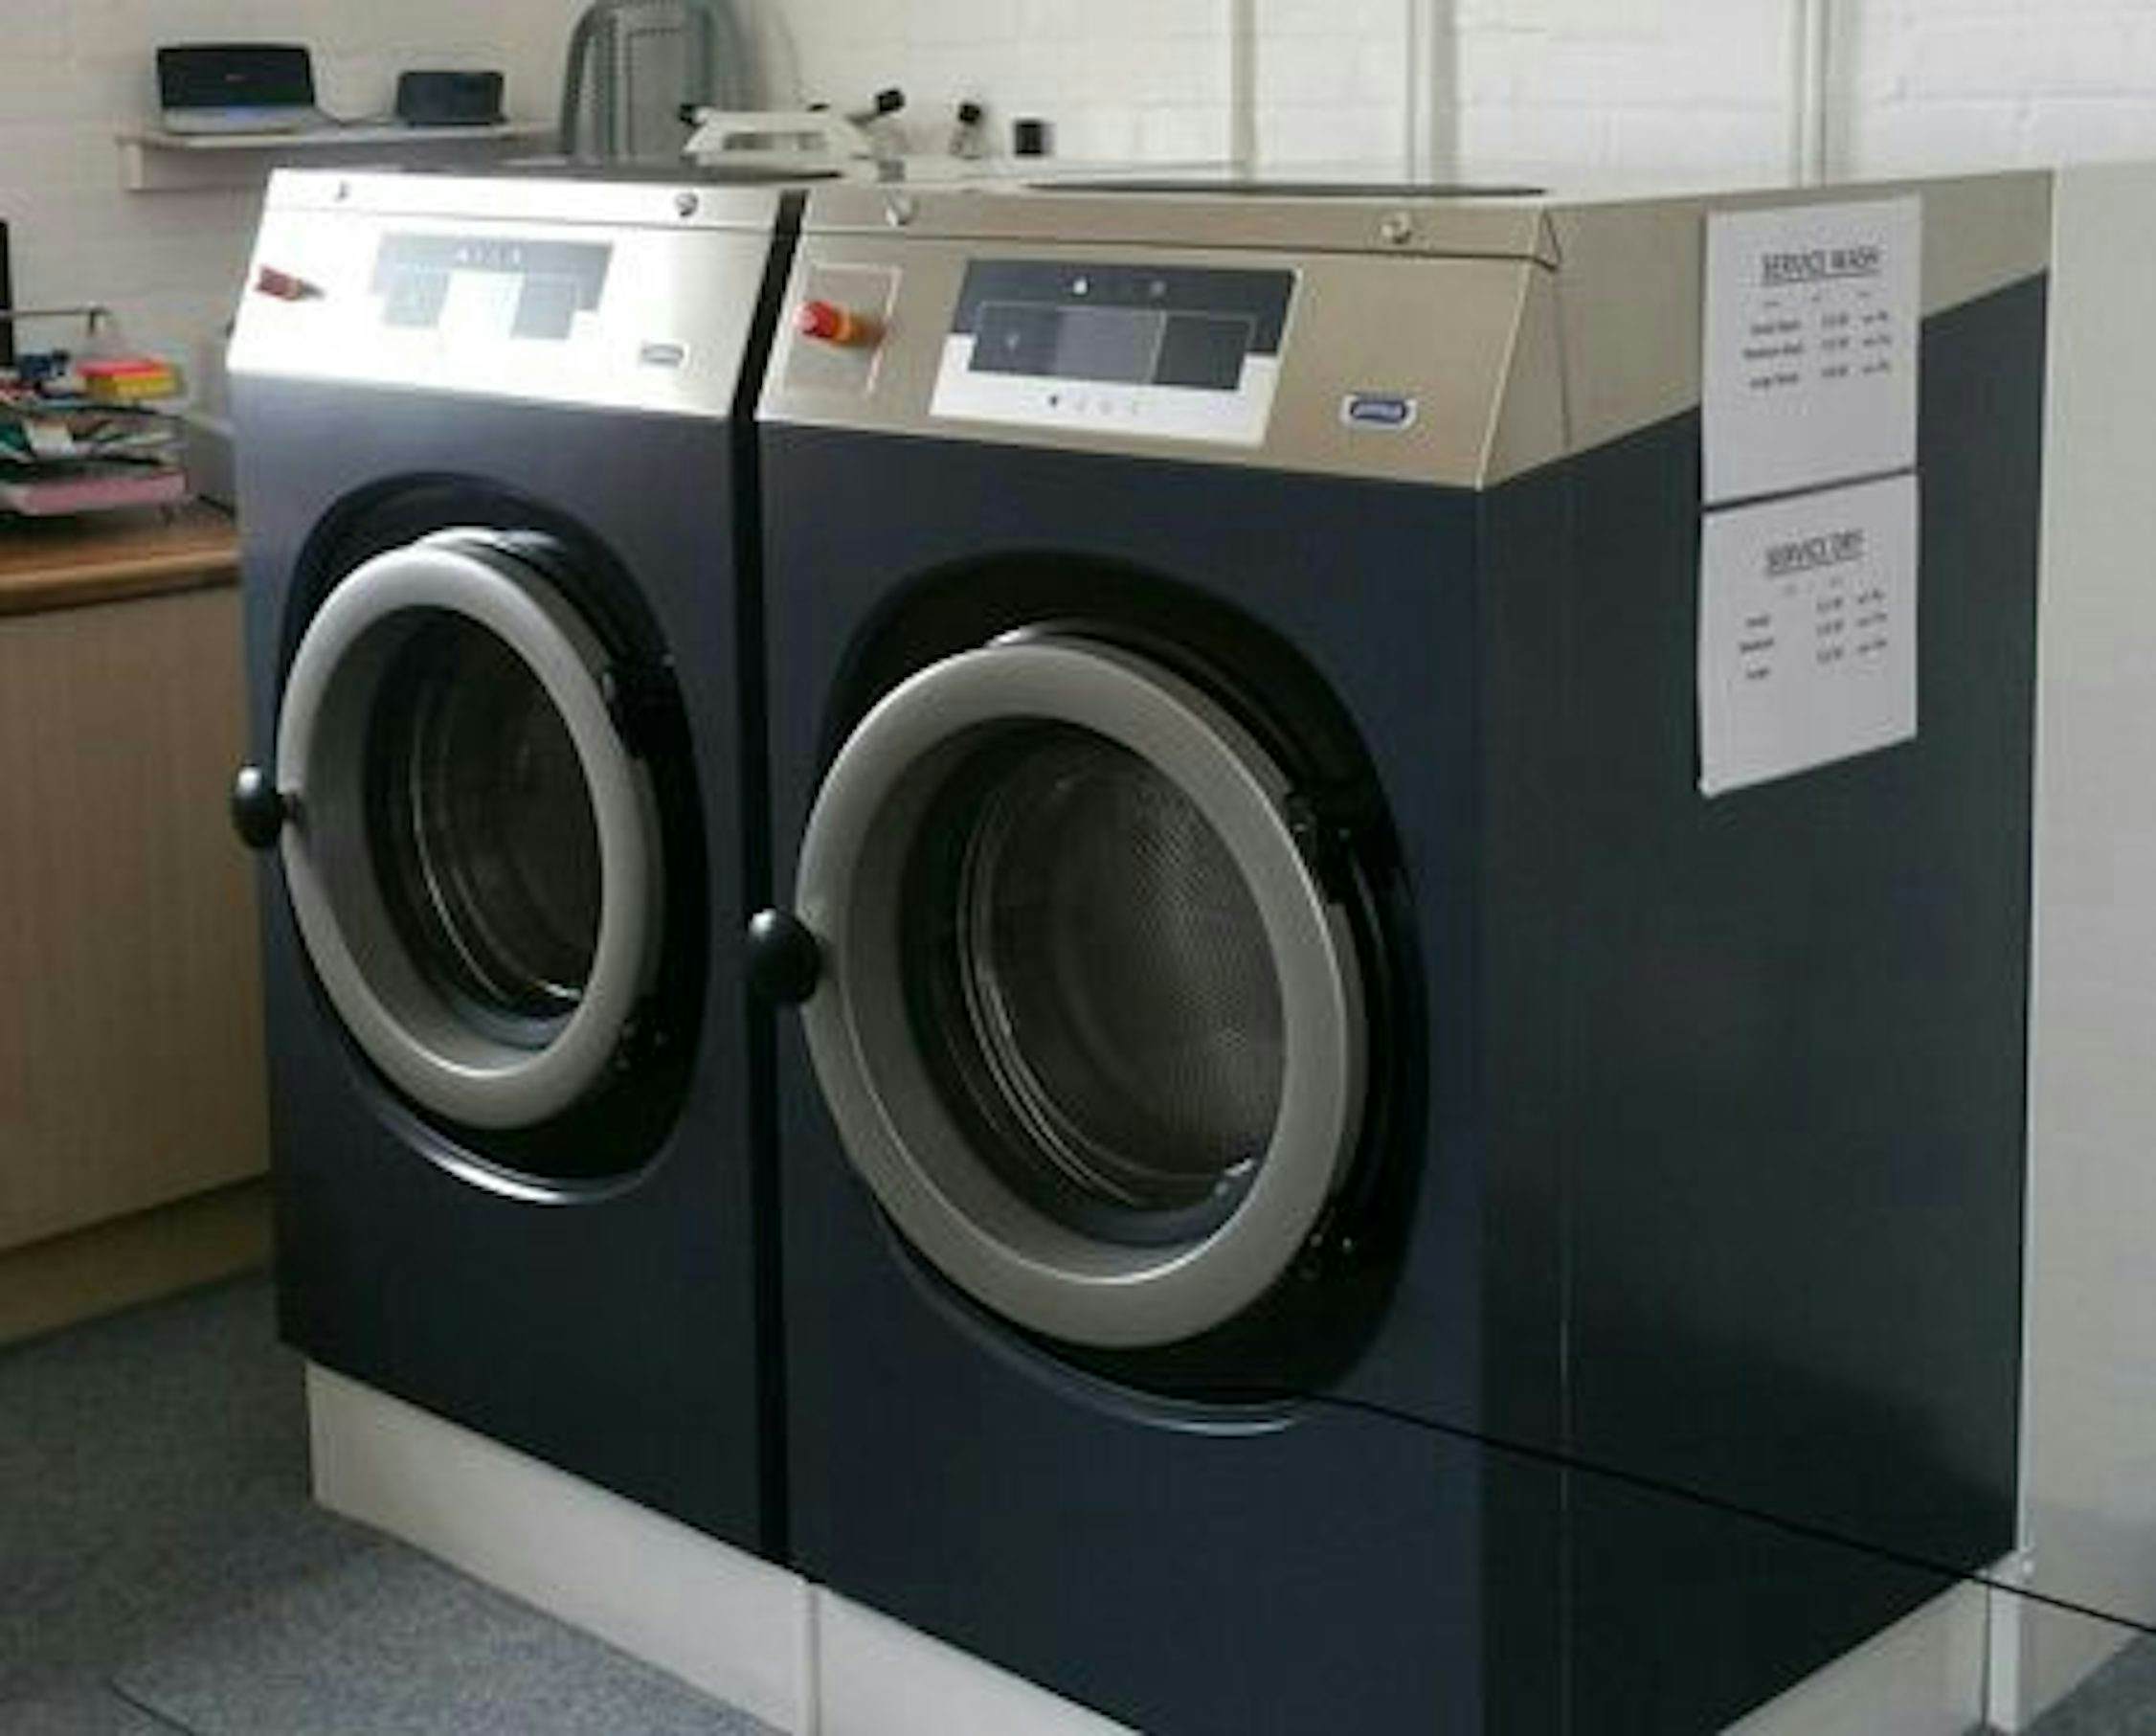 Forbes Professional Helps Plan, Design and Equip a New Commercial Launderette